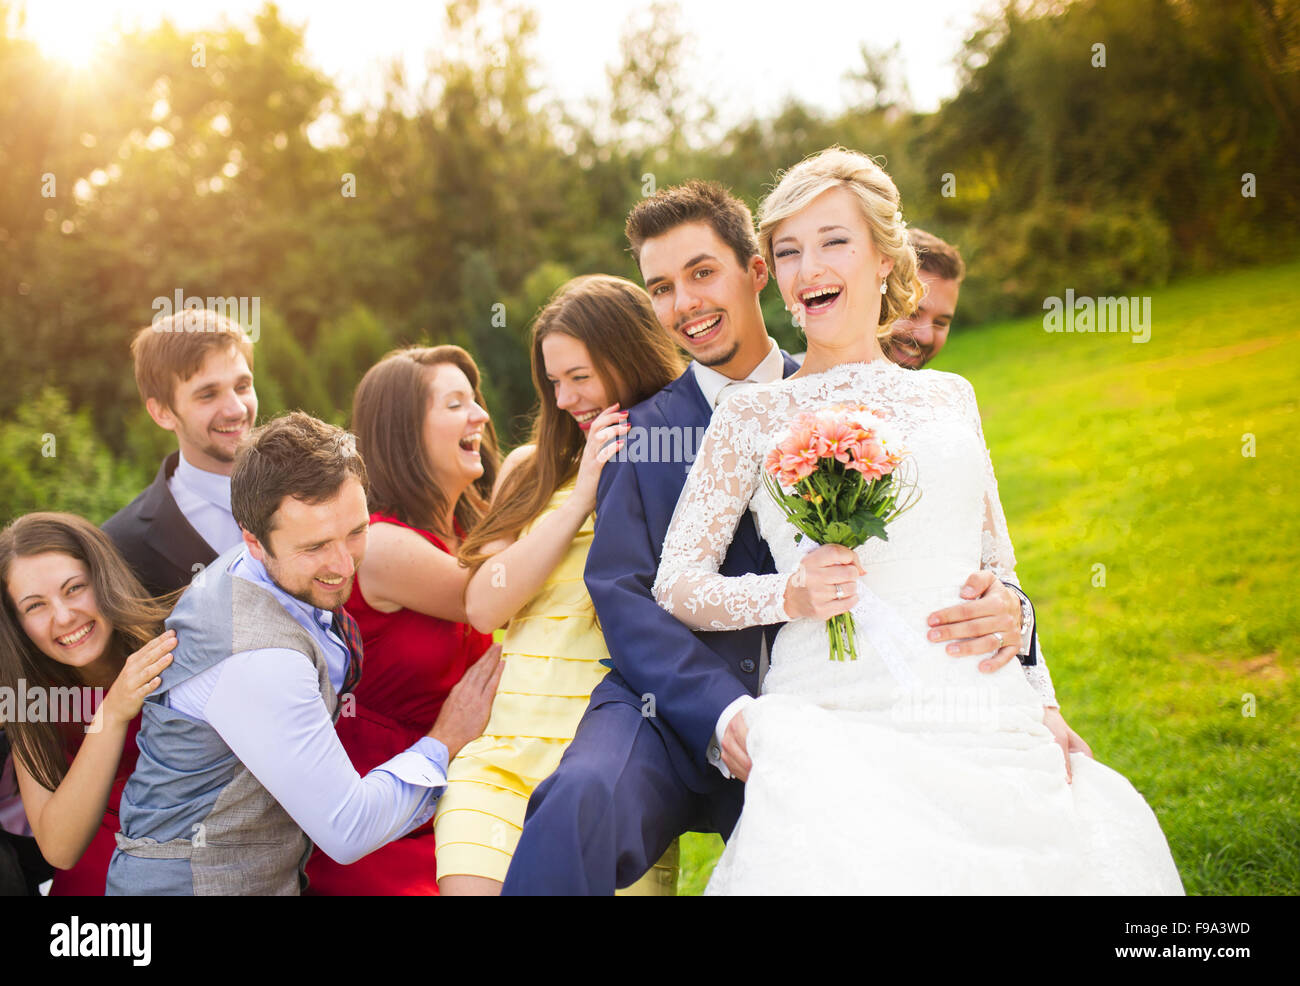 Portrait of newlywed couple having fun with bridesmaids and groomsmen in green sunny park Stock Photo